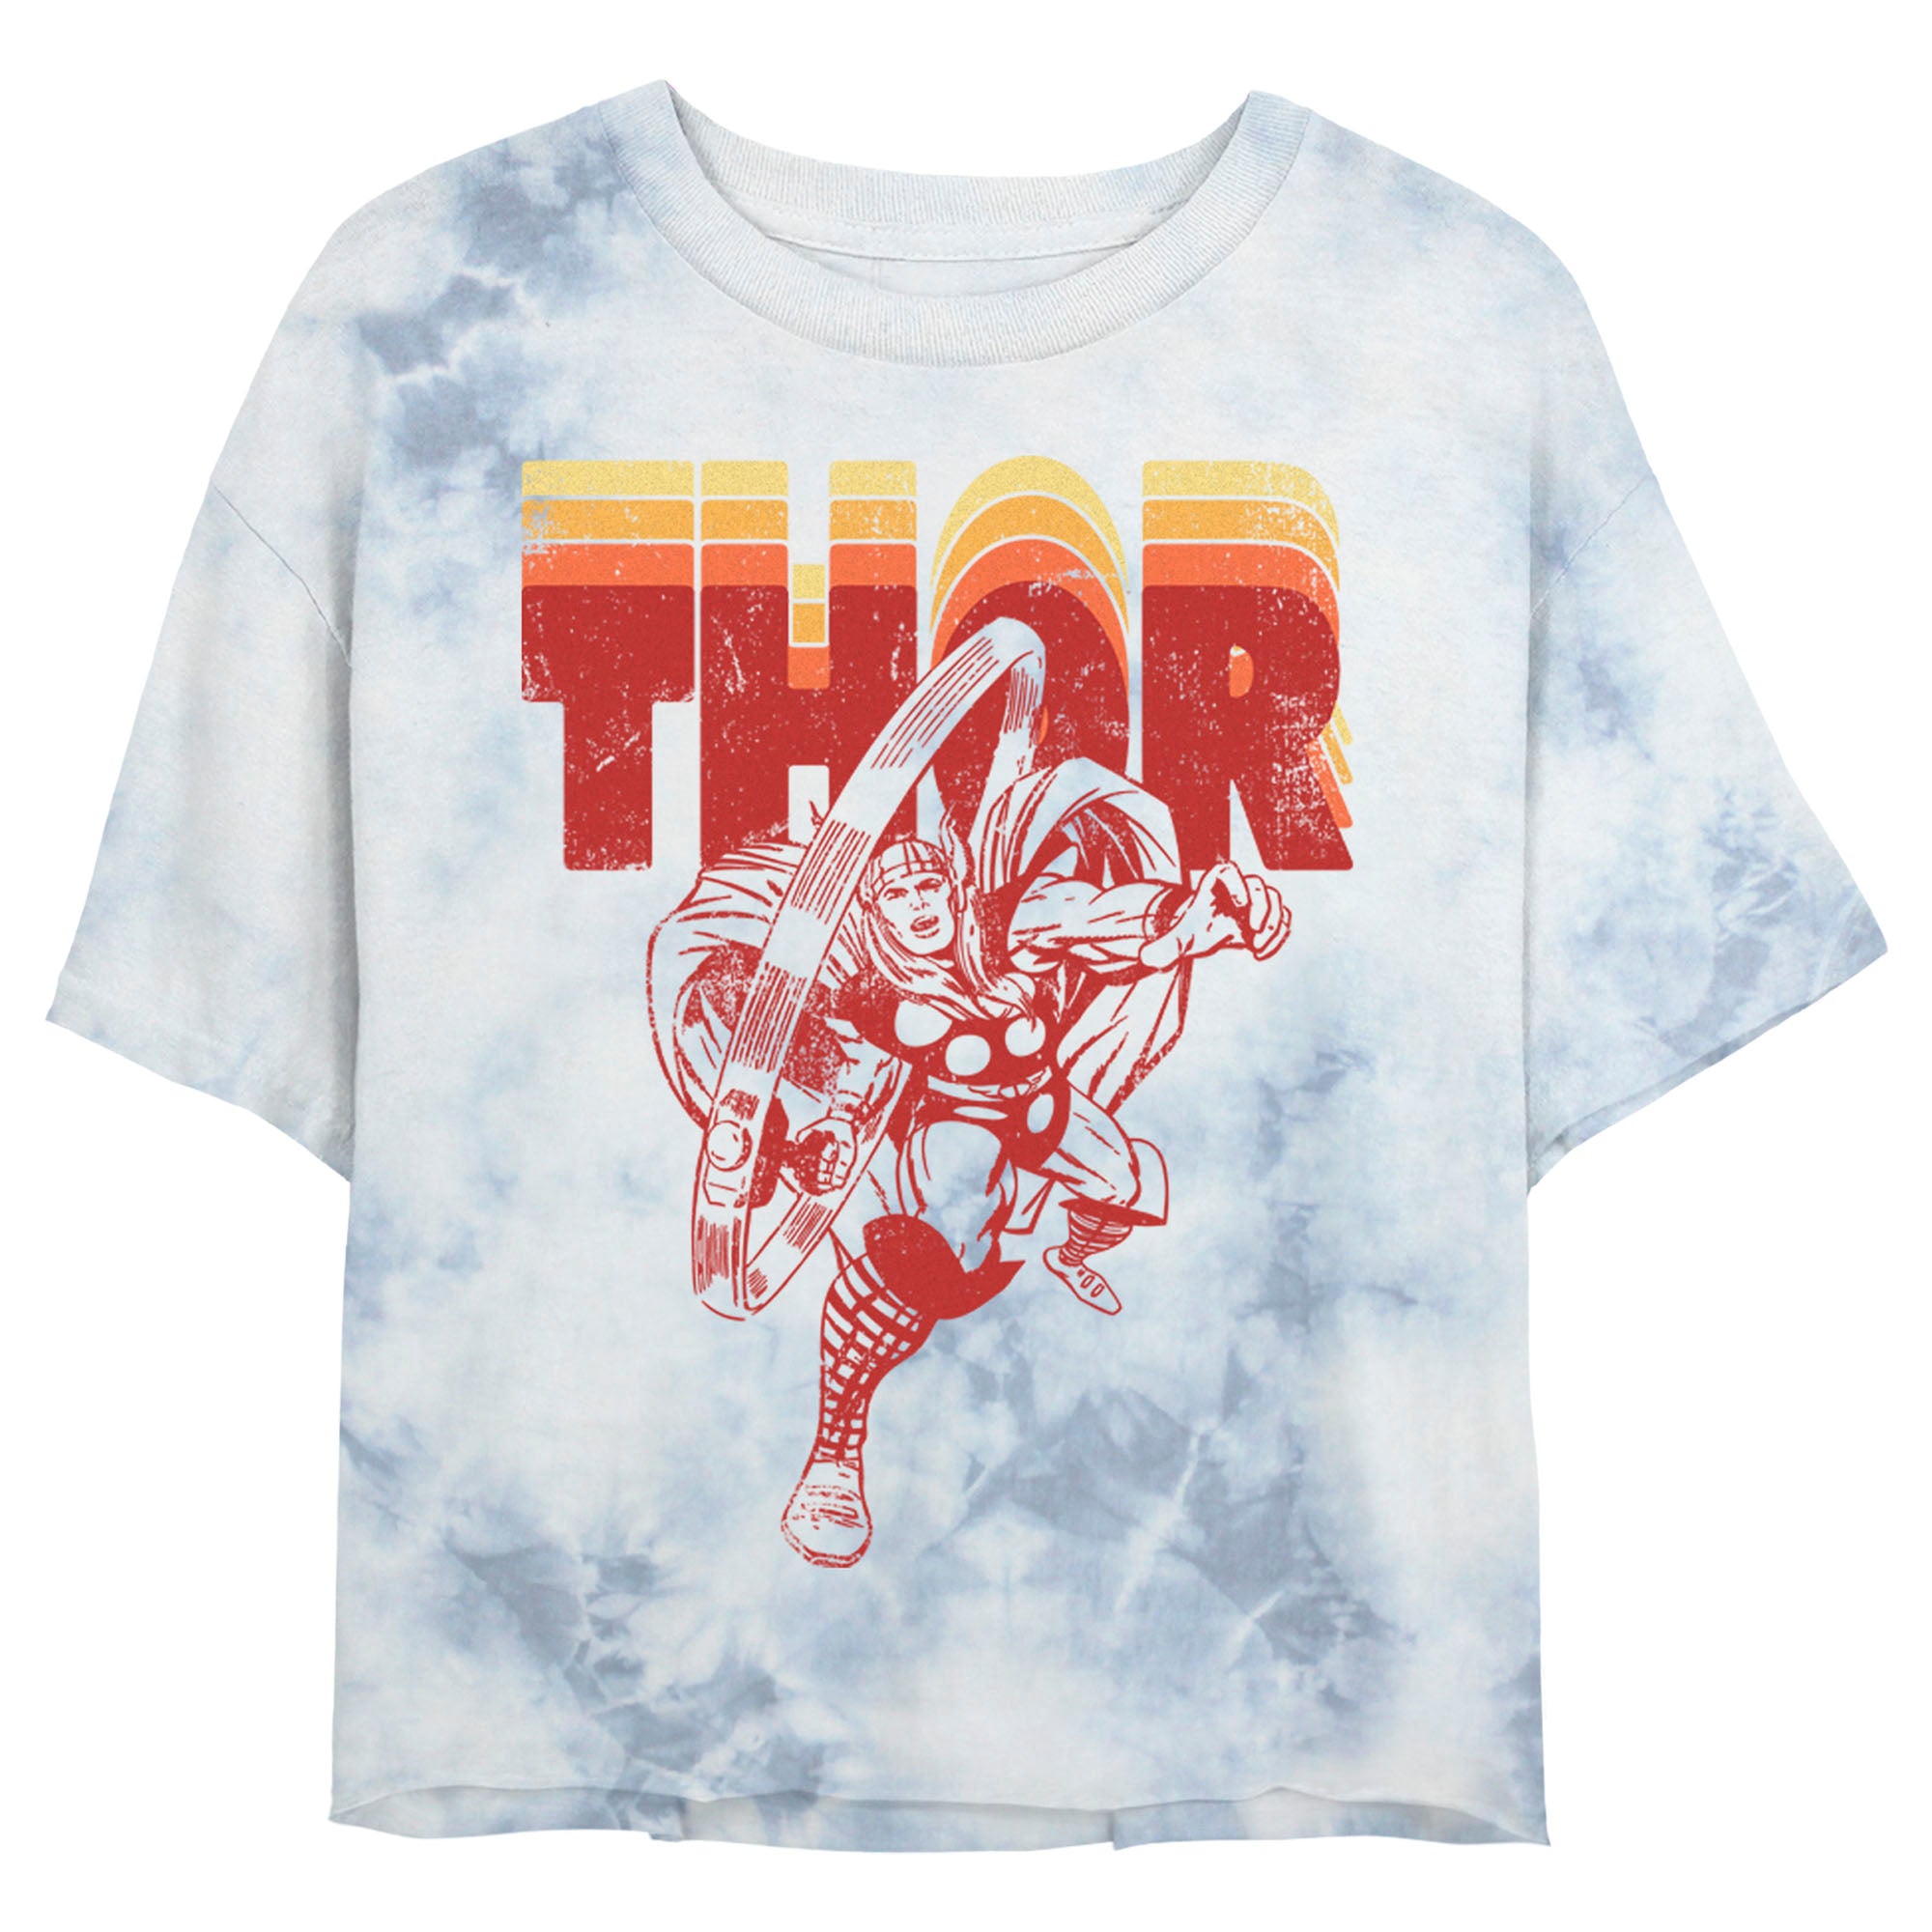 Shop Our Box The Join – Today Line Avengers: Mouse Merch Kids Marvel the Apparel